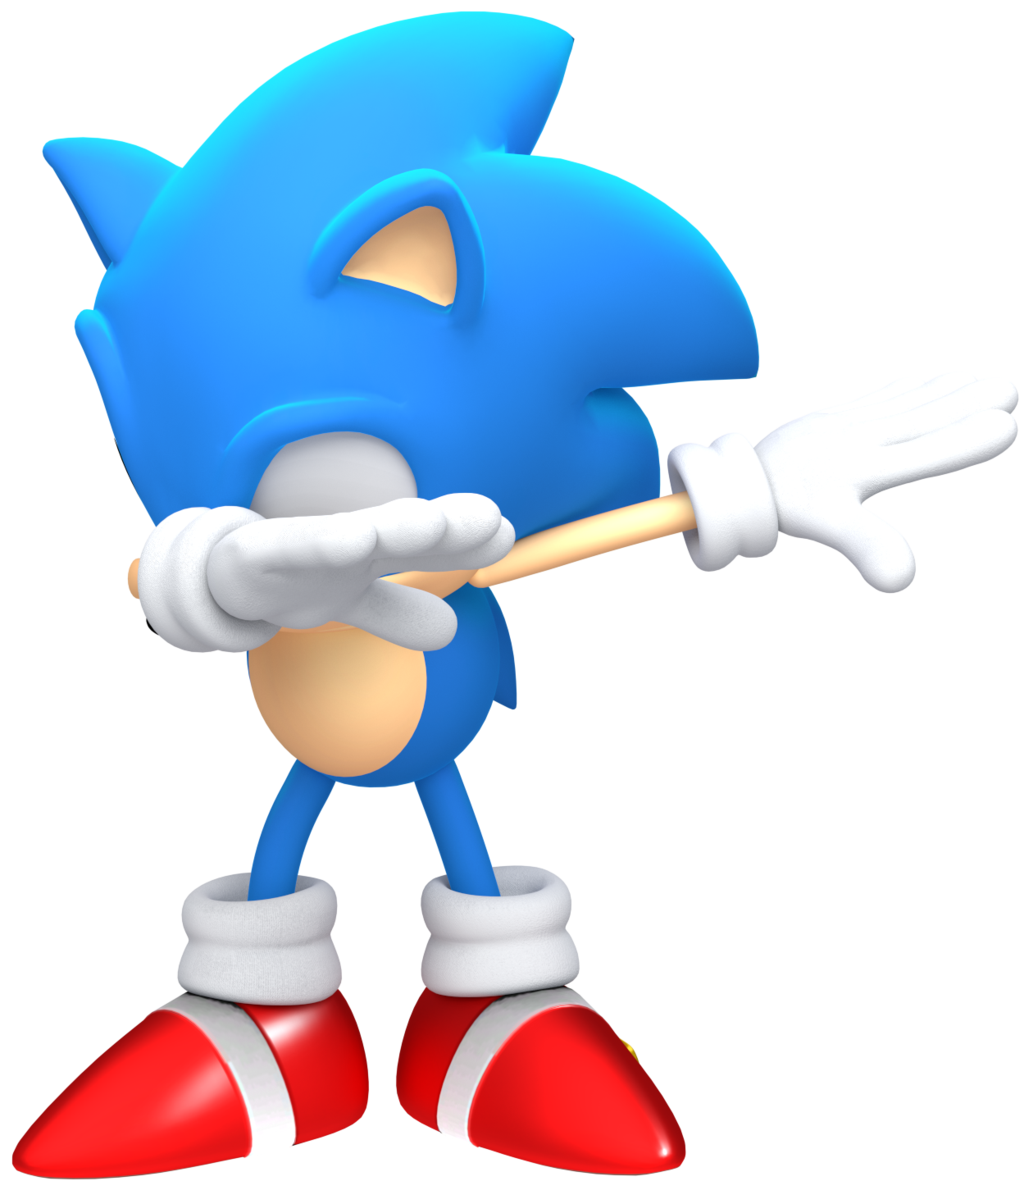 Download Sonic Wallpaper Computer Of Rise Figurine Mania Hq Png Image Freepngimg